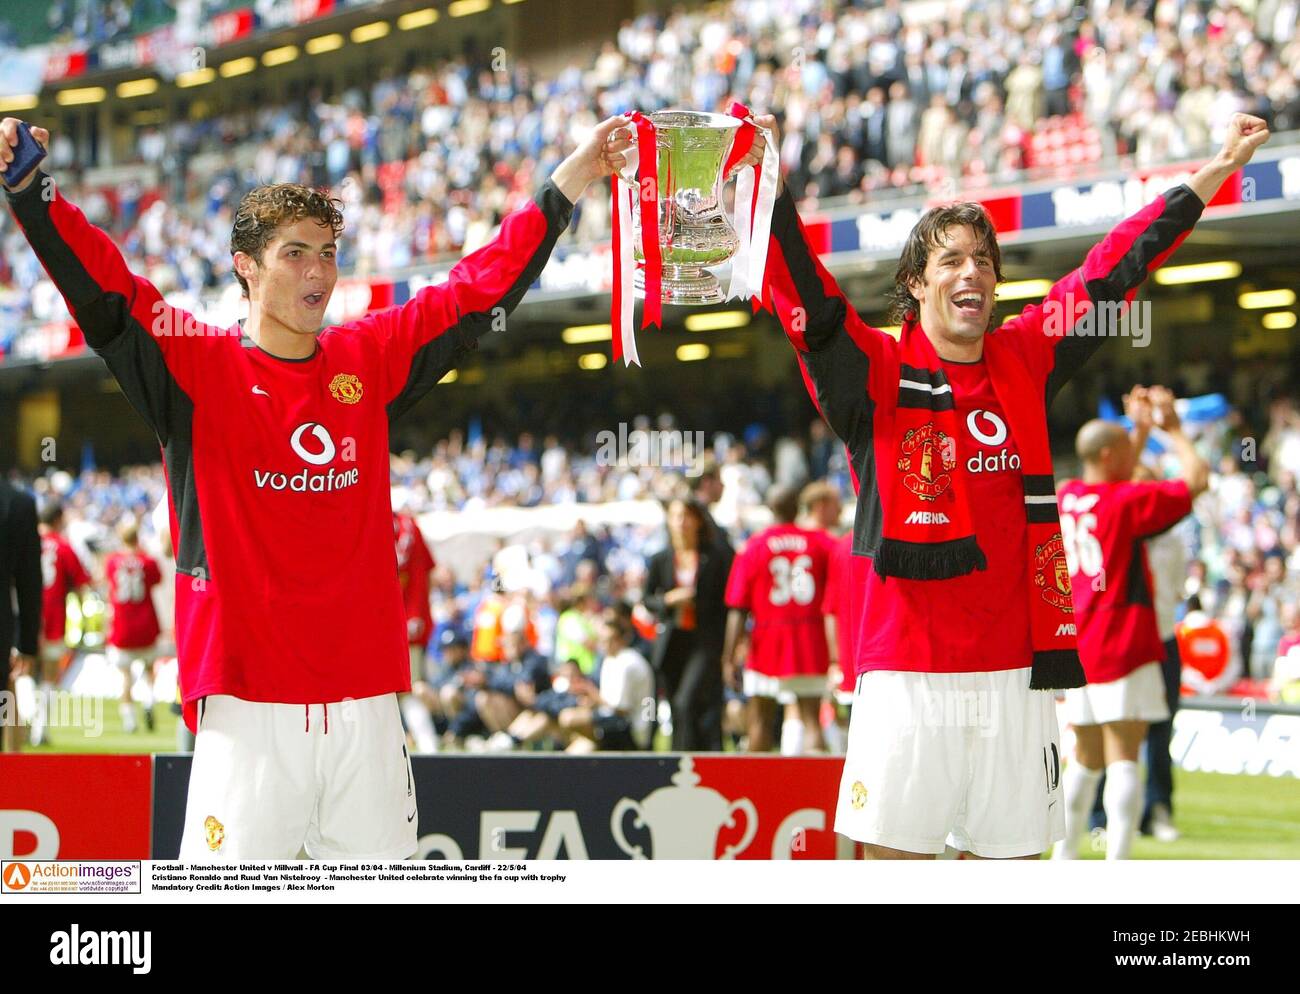 Football - Manchester United v Millwall - FA Cup Final 03/04 - Millennium  Stadium, Cardiff - 22/5/04 Cristiano Ronaldo and Ruud Van Nistelrooy - Manchester  United celebrate winning the fa cup with